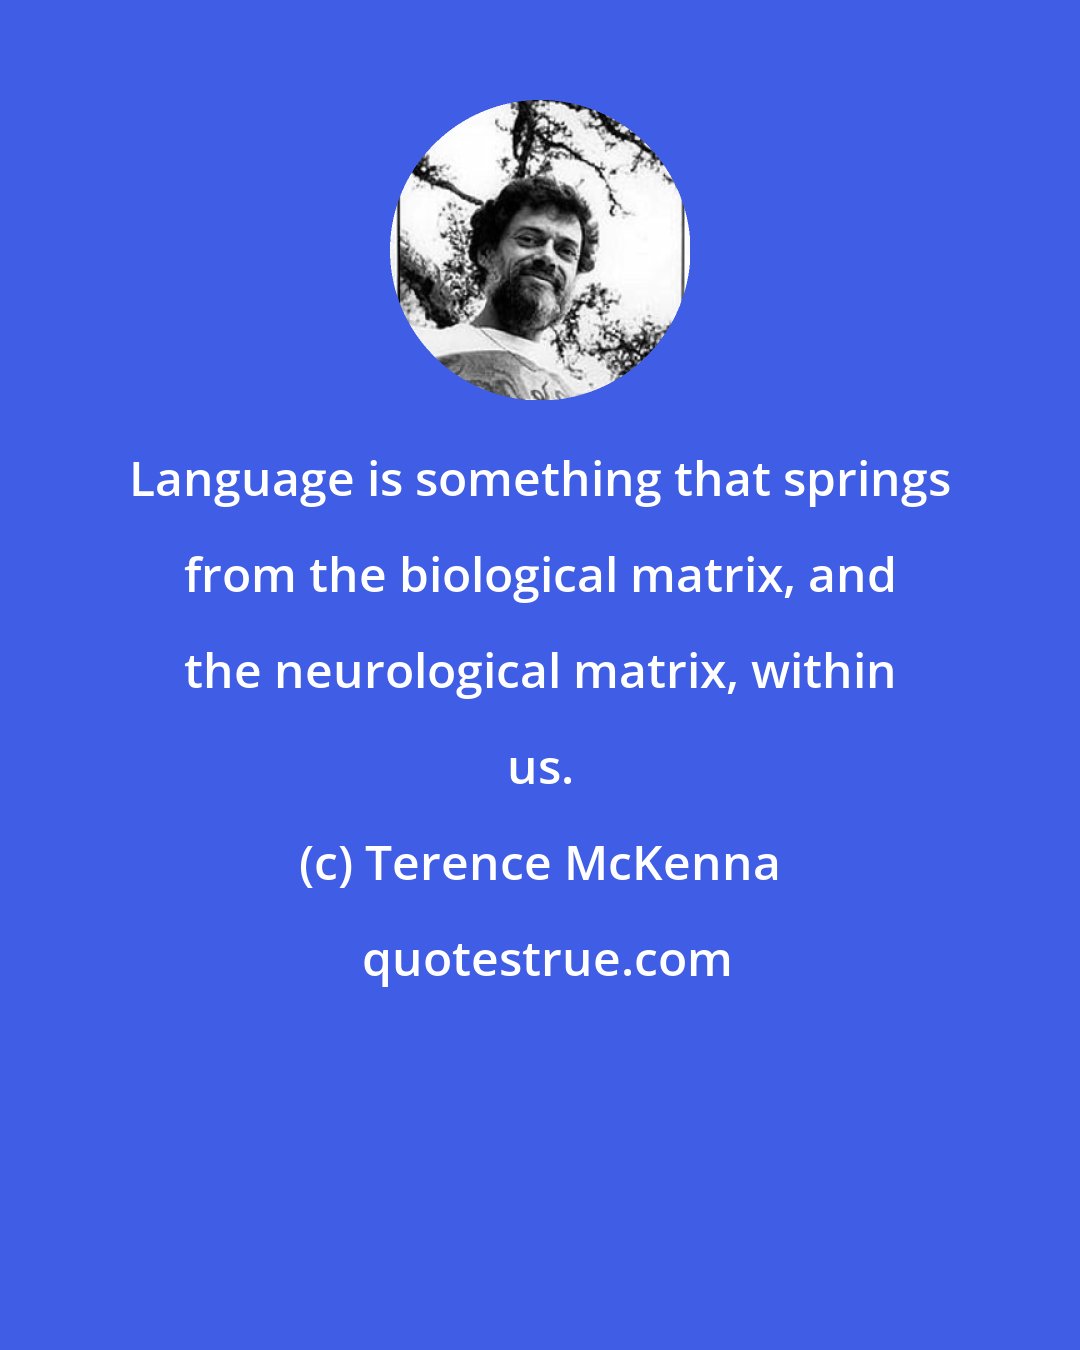 Terence McKenna: Language is something that springs from the biological matrix, and the neurological matrix, within us.